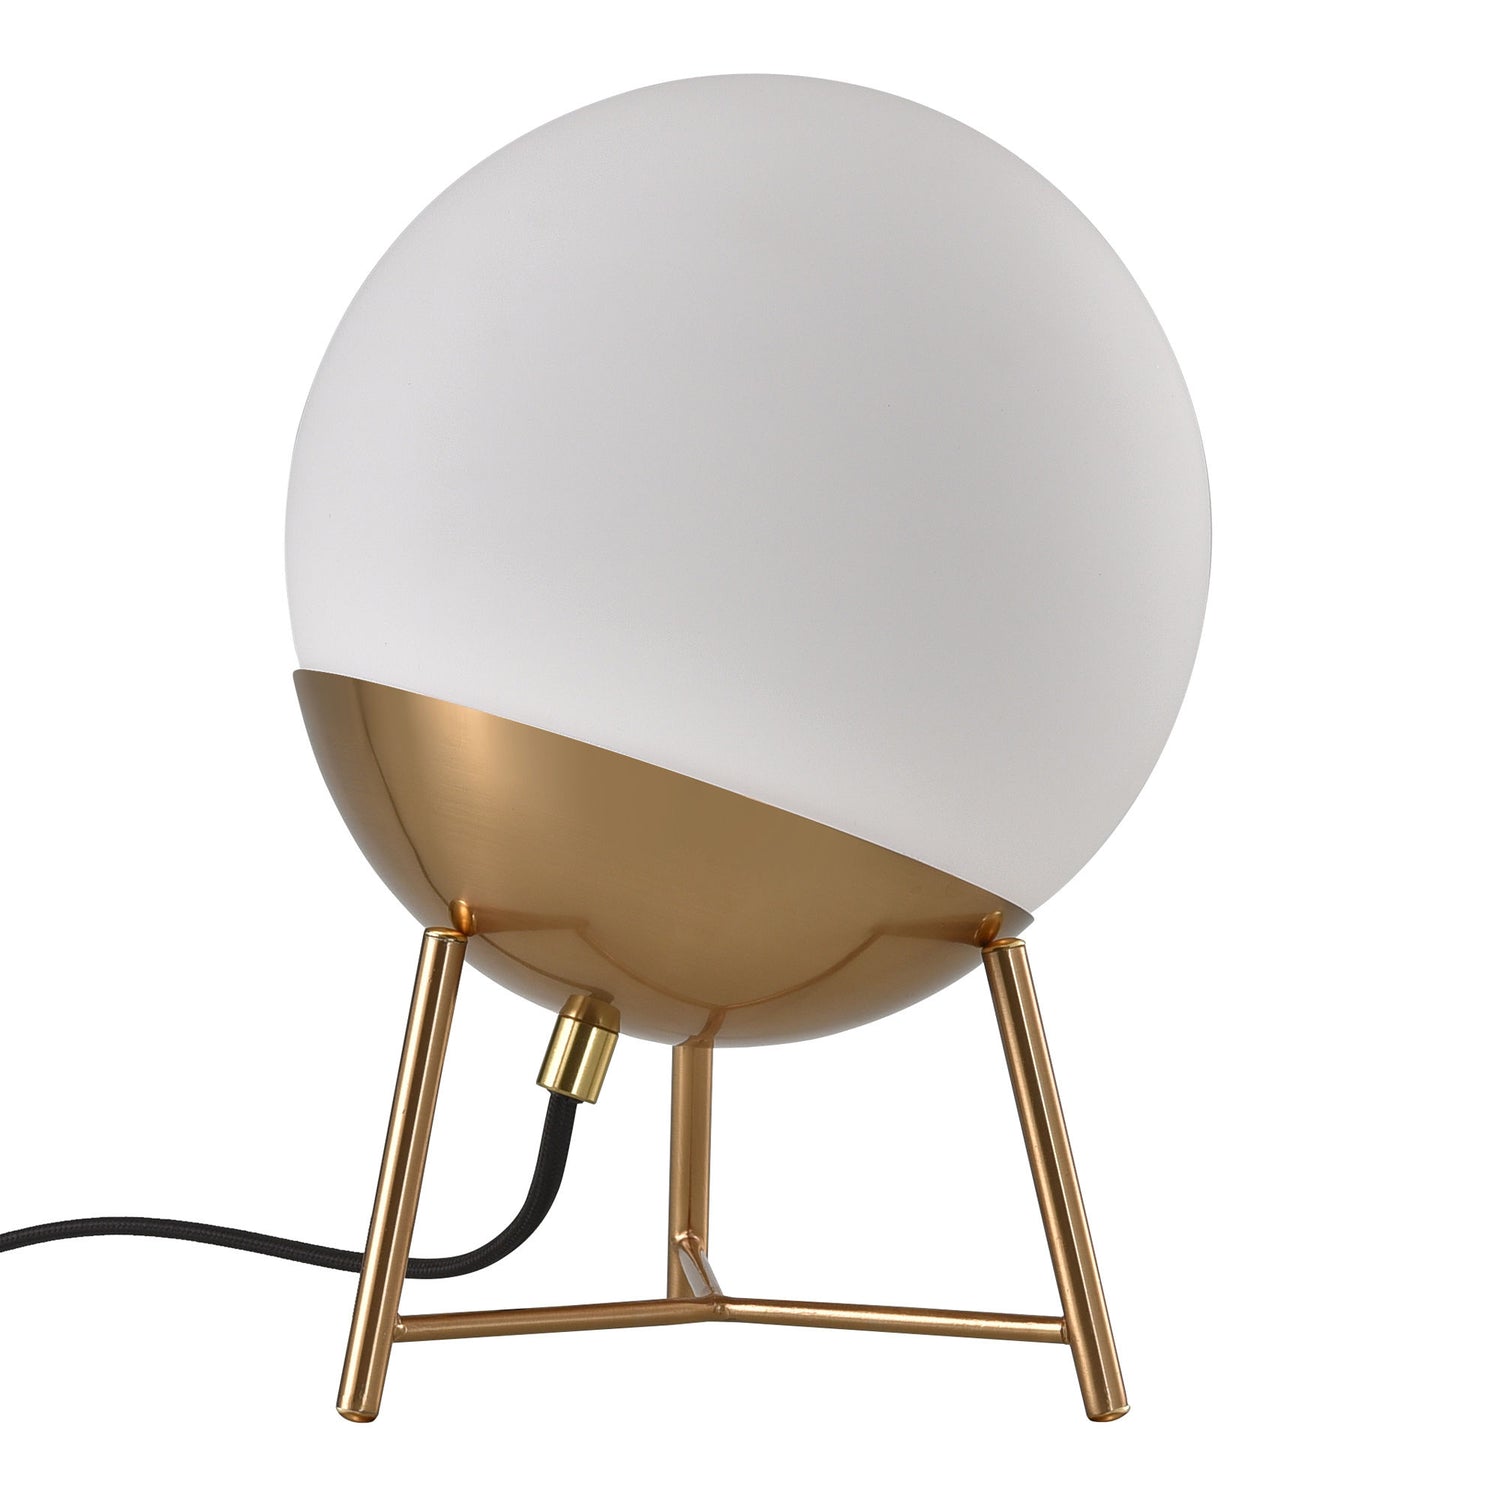 House Nordic - Chelsea table lamp